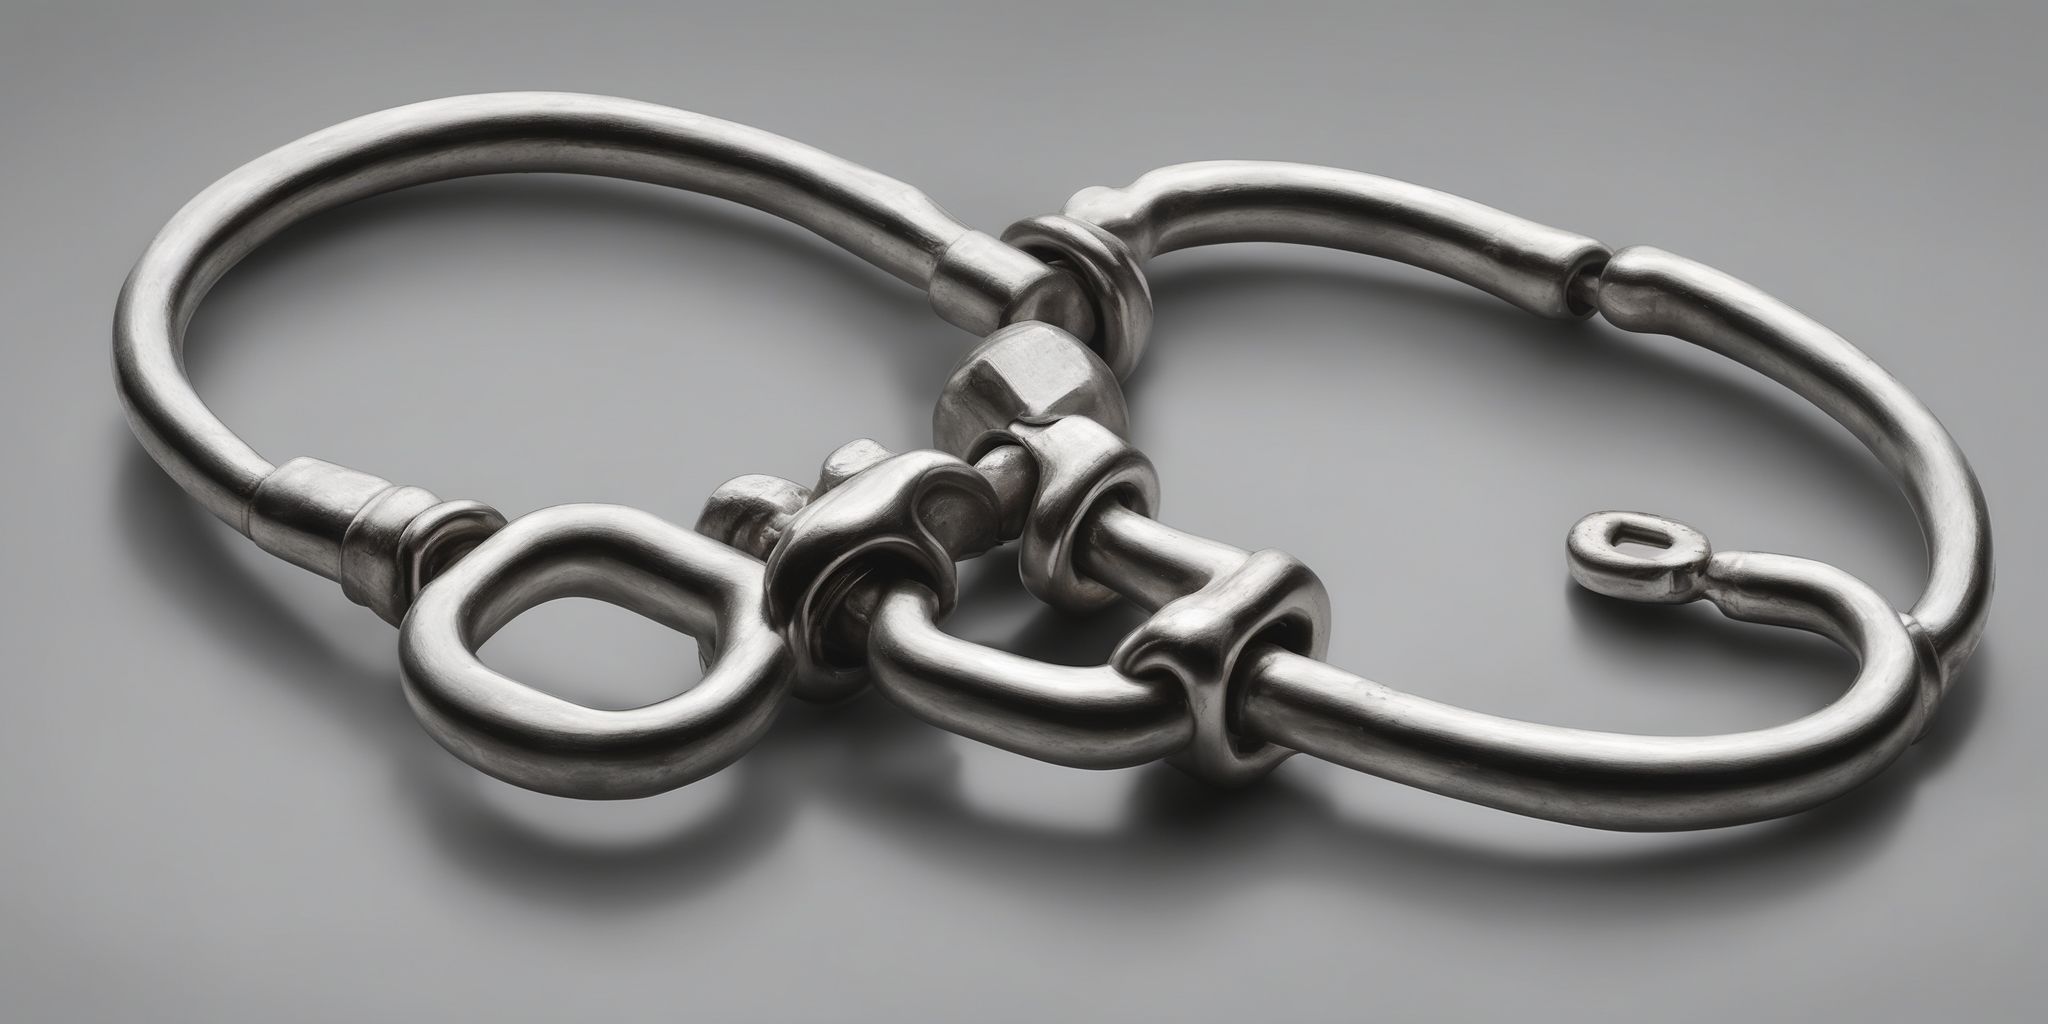 Shackle  in realistic, photographic style